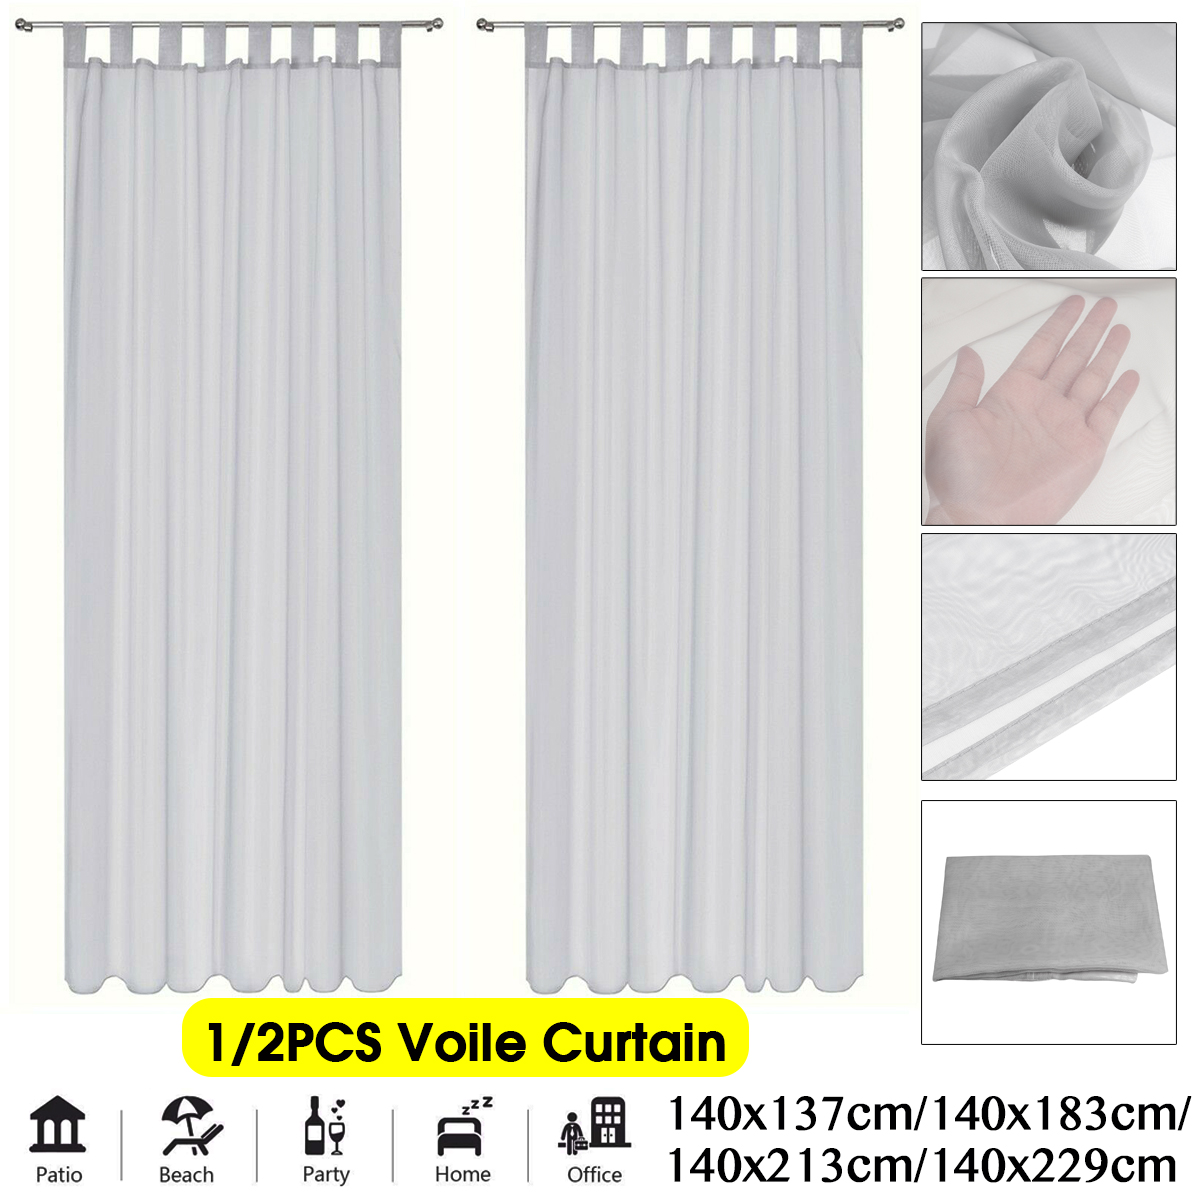 12PCS-White-Voile-Curtain-Polyester-Breathable-Tulle-Sheer-Curtains-for-Kitchen-Living-Room-Bedroom-1922438-1